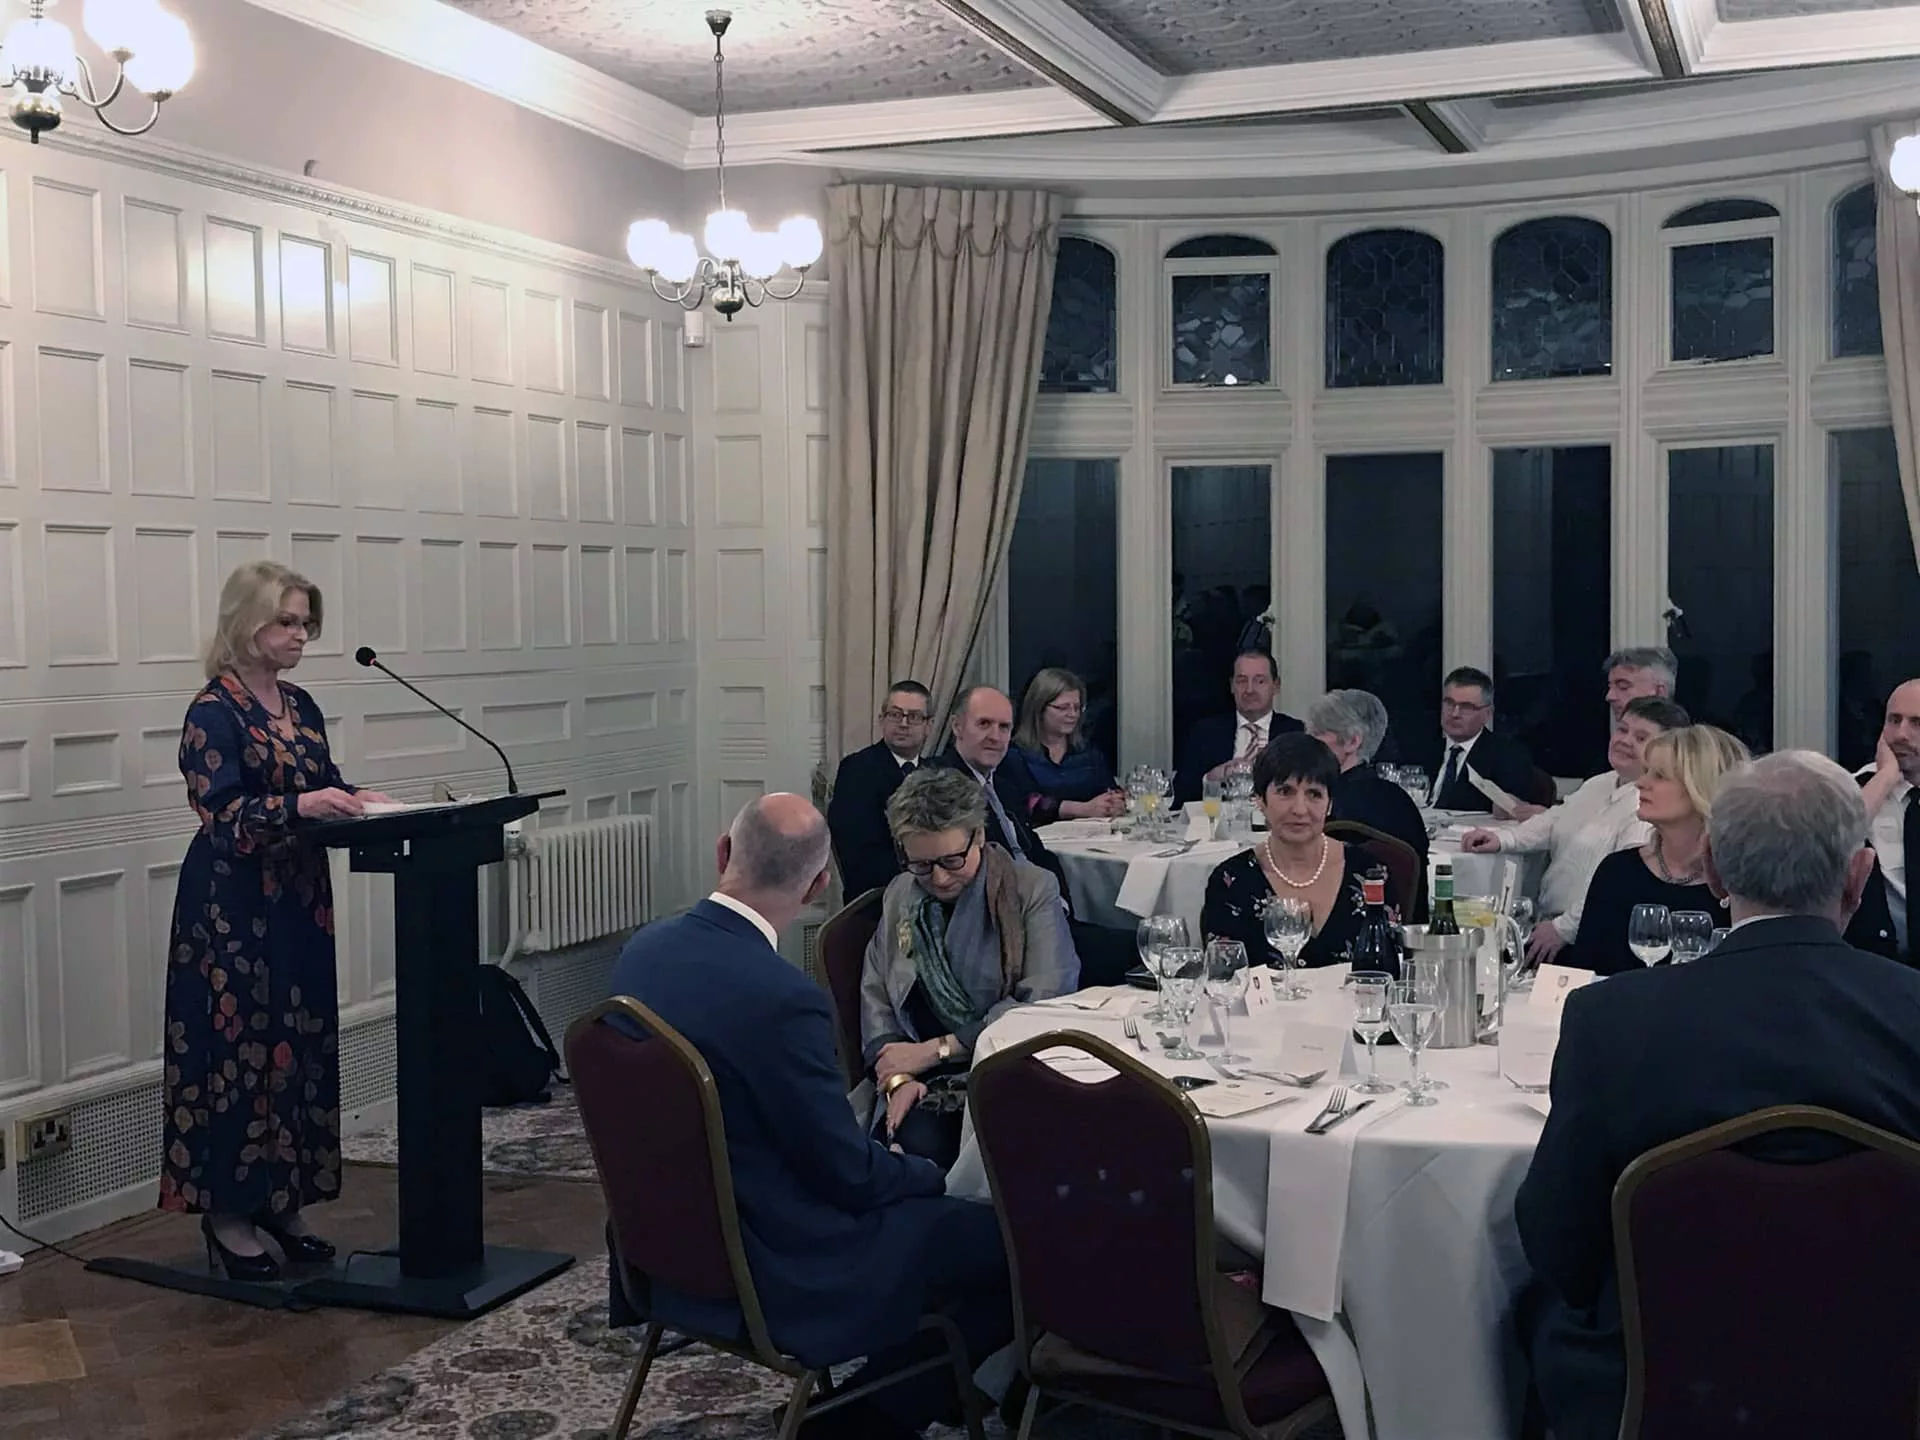 Annual Justice Dinner held at Bletchley Park